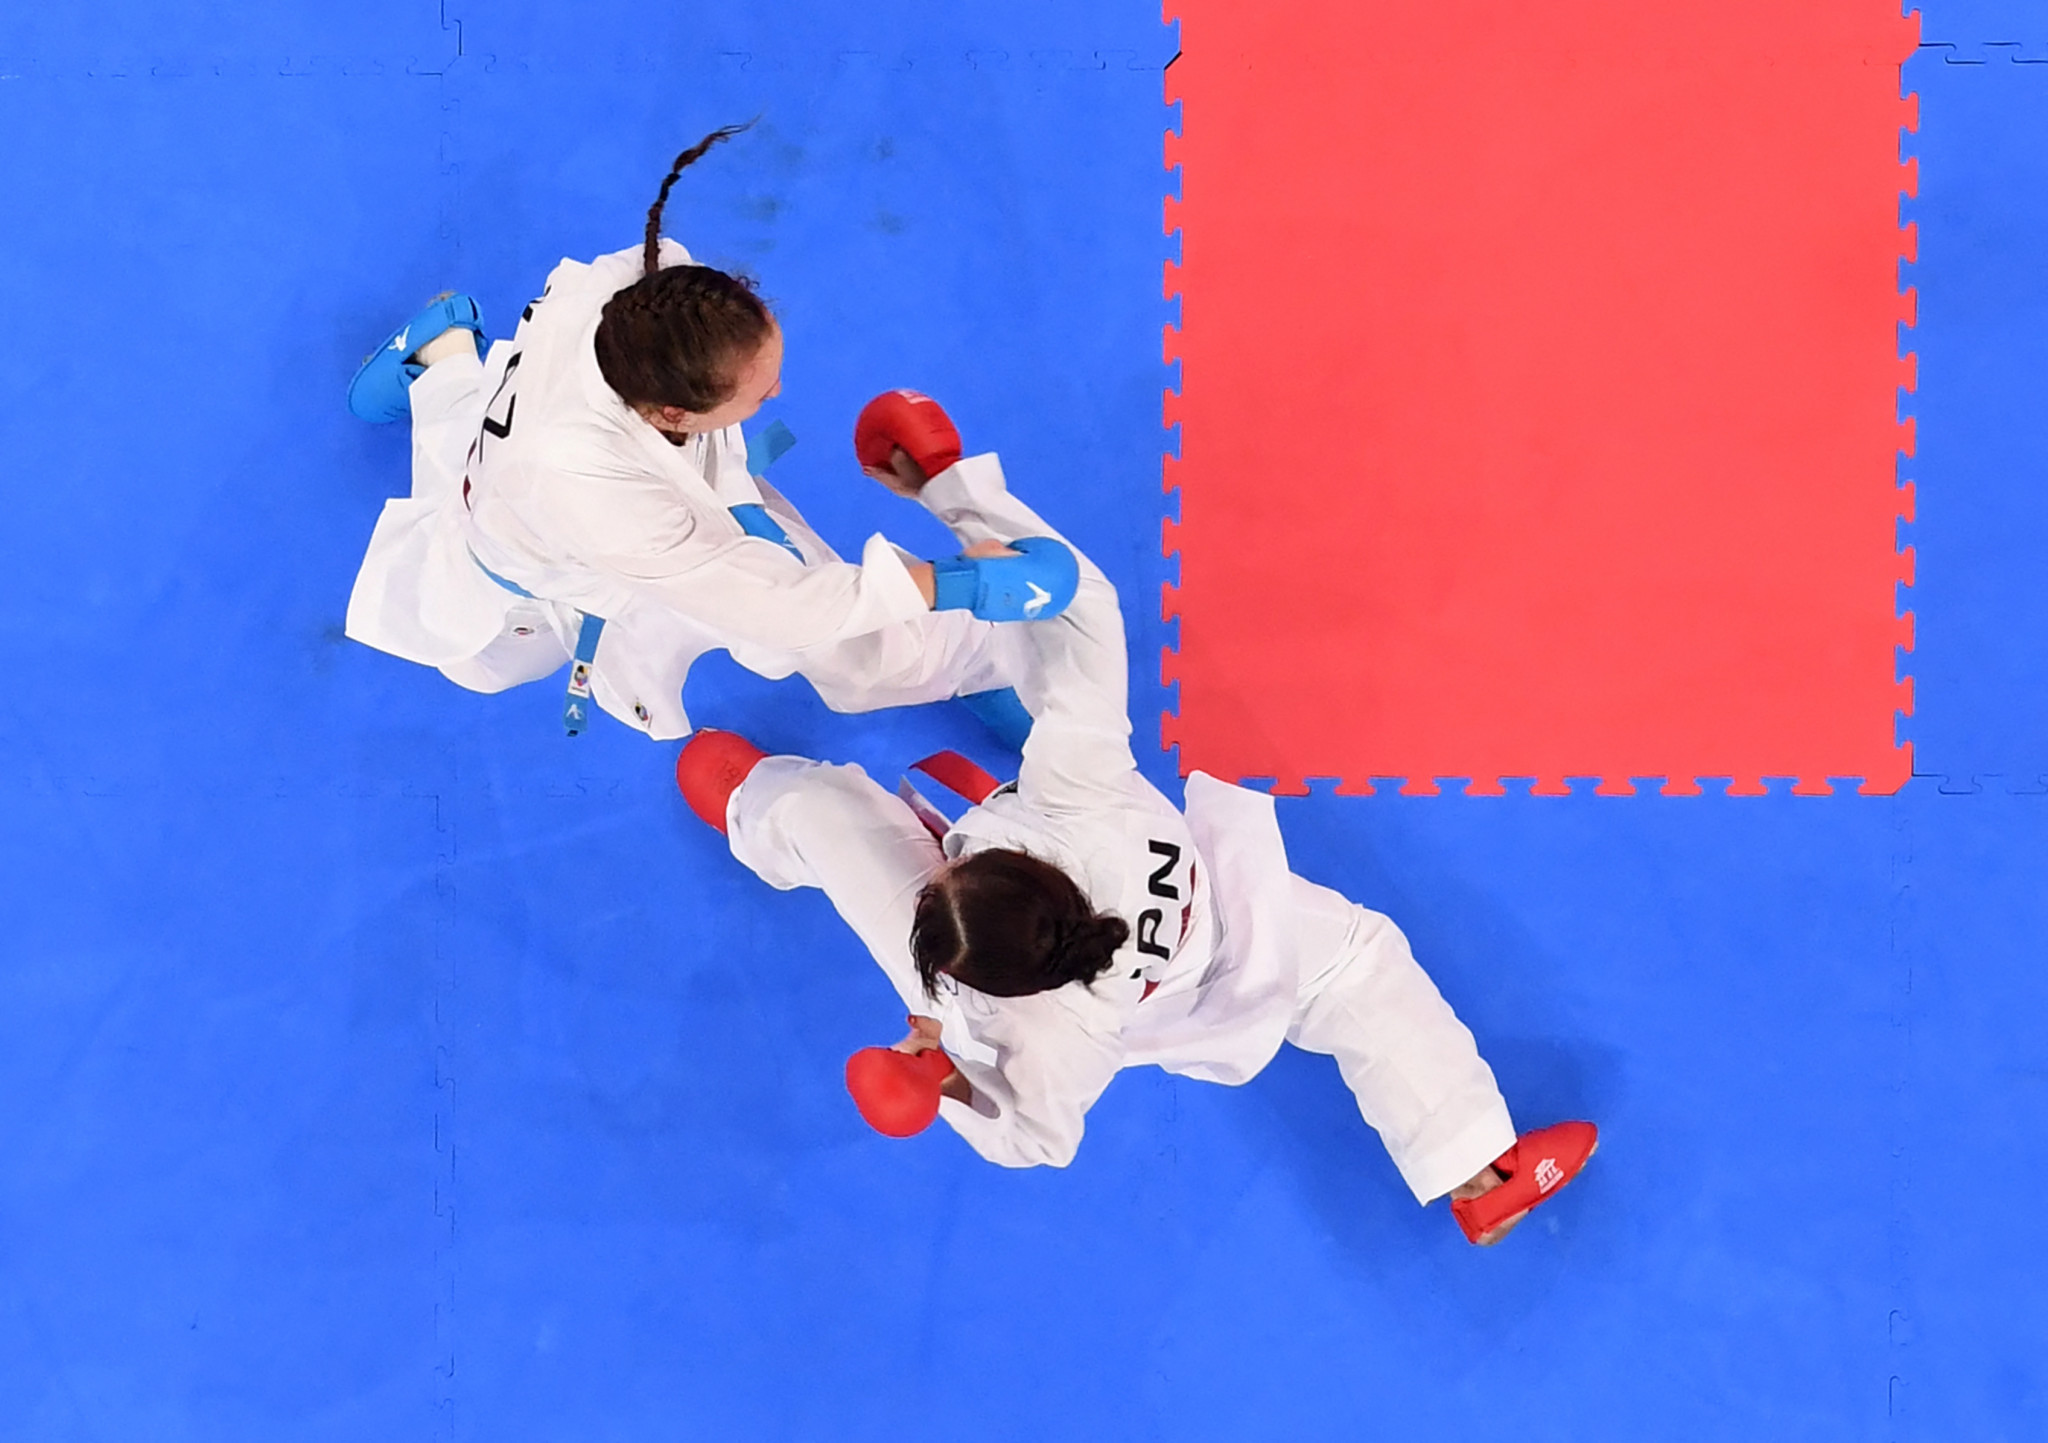 Karate's appearance at the 2025 Games of the Small States of Europe is set to mark its debut at the multi-sport event ©Getty Images